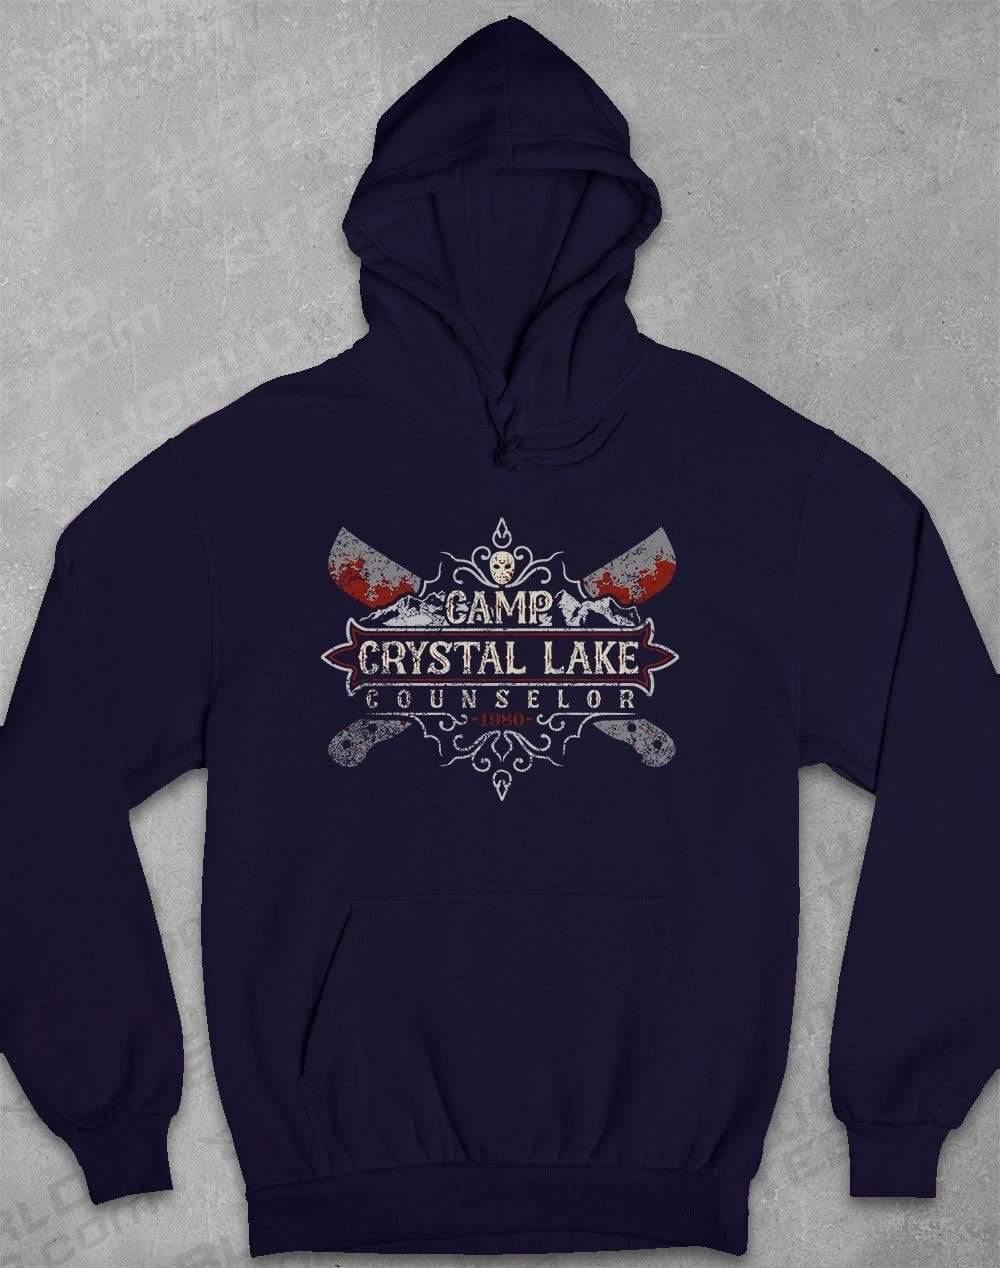 Camp Crystal Lake Counselor Hoodie S / Navy  - Off World Tees